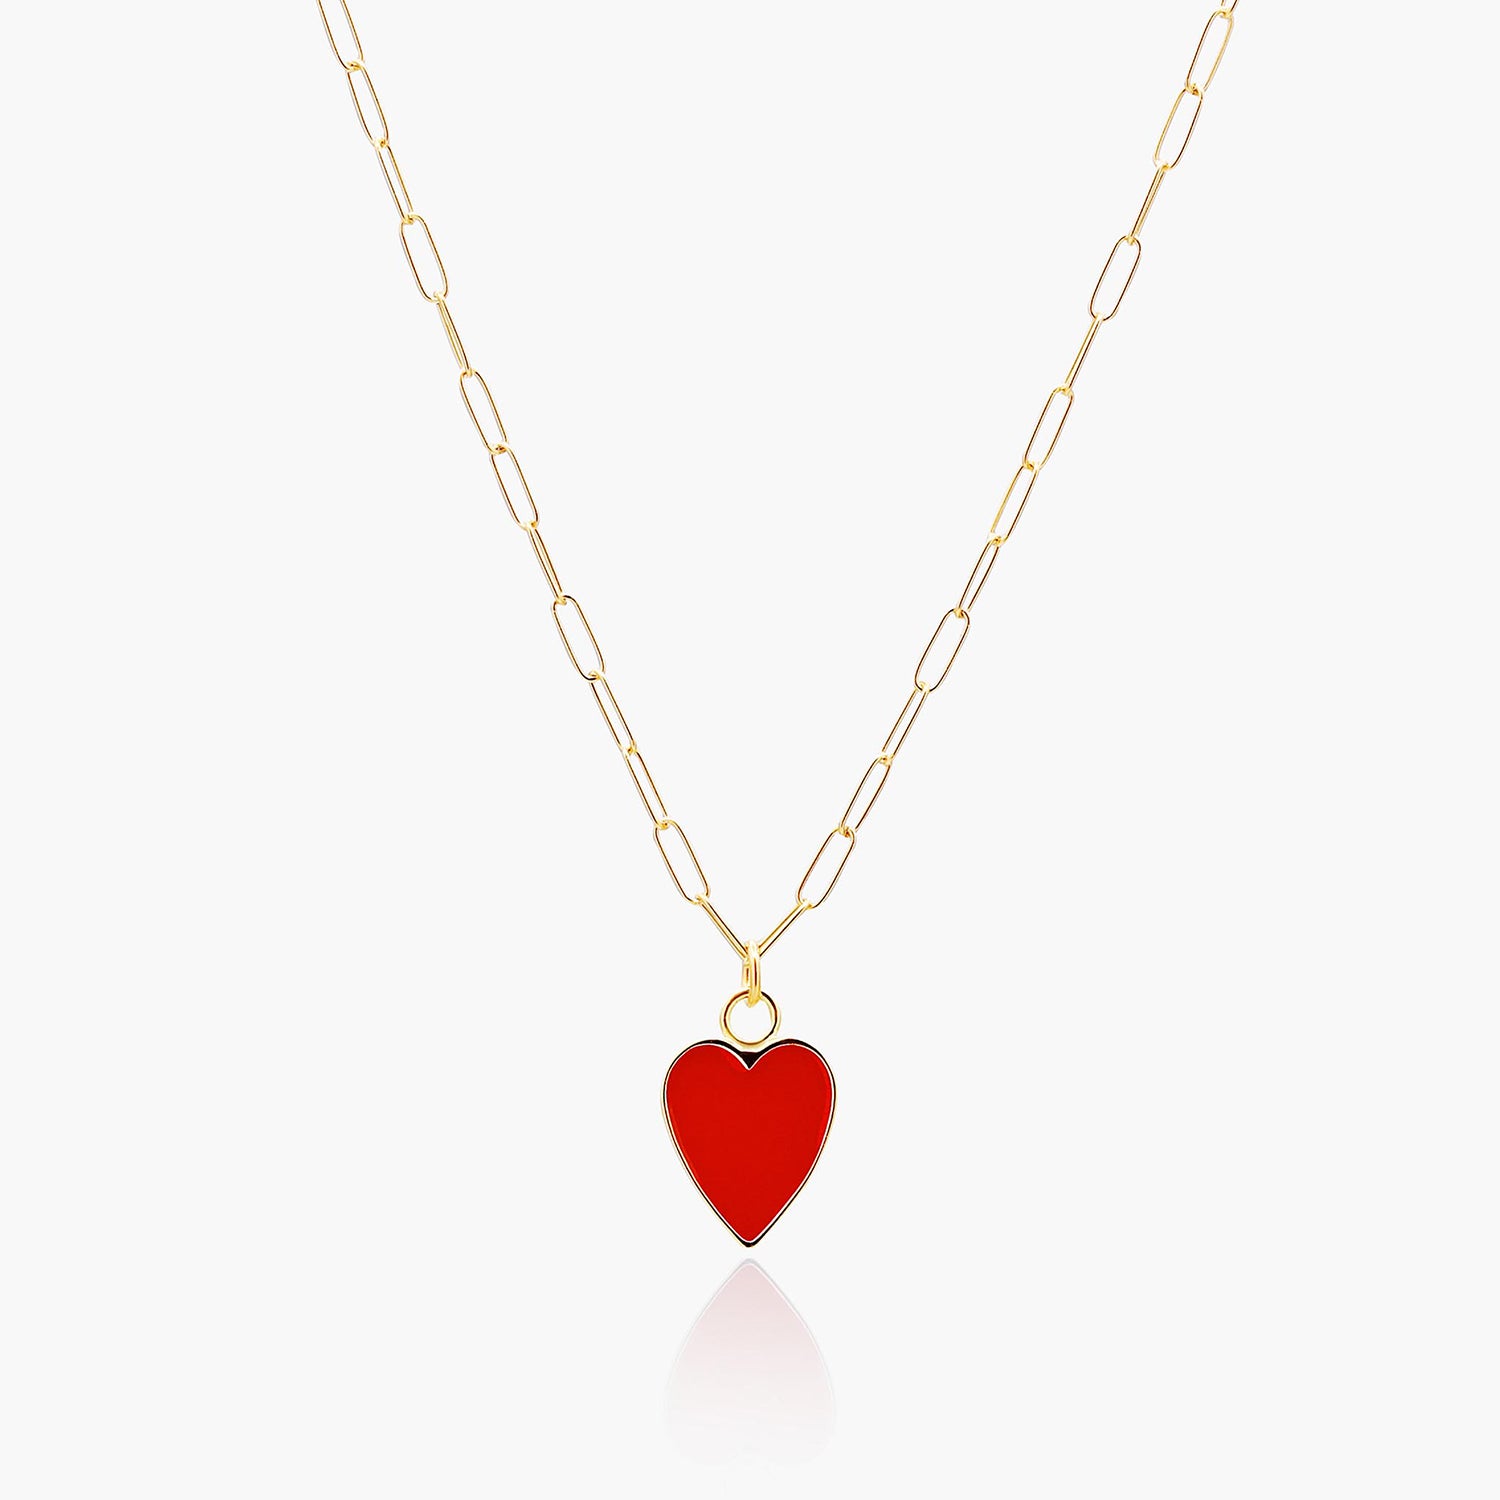 Playa Luna Jewelry Red and Gold Heart Necklace Anna